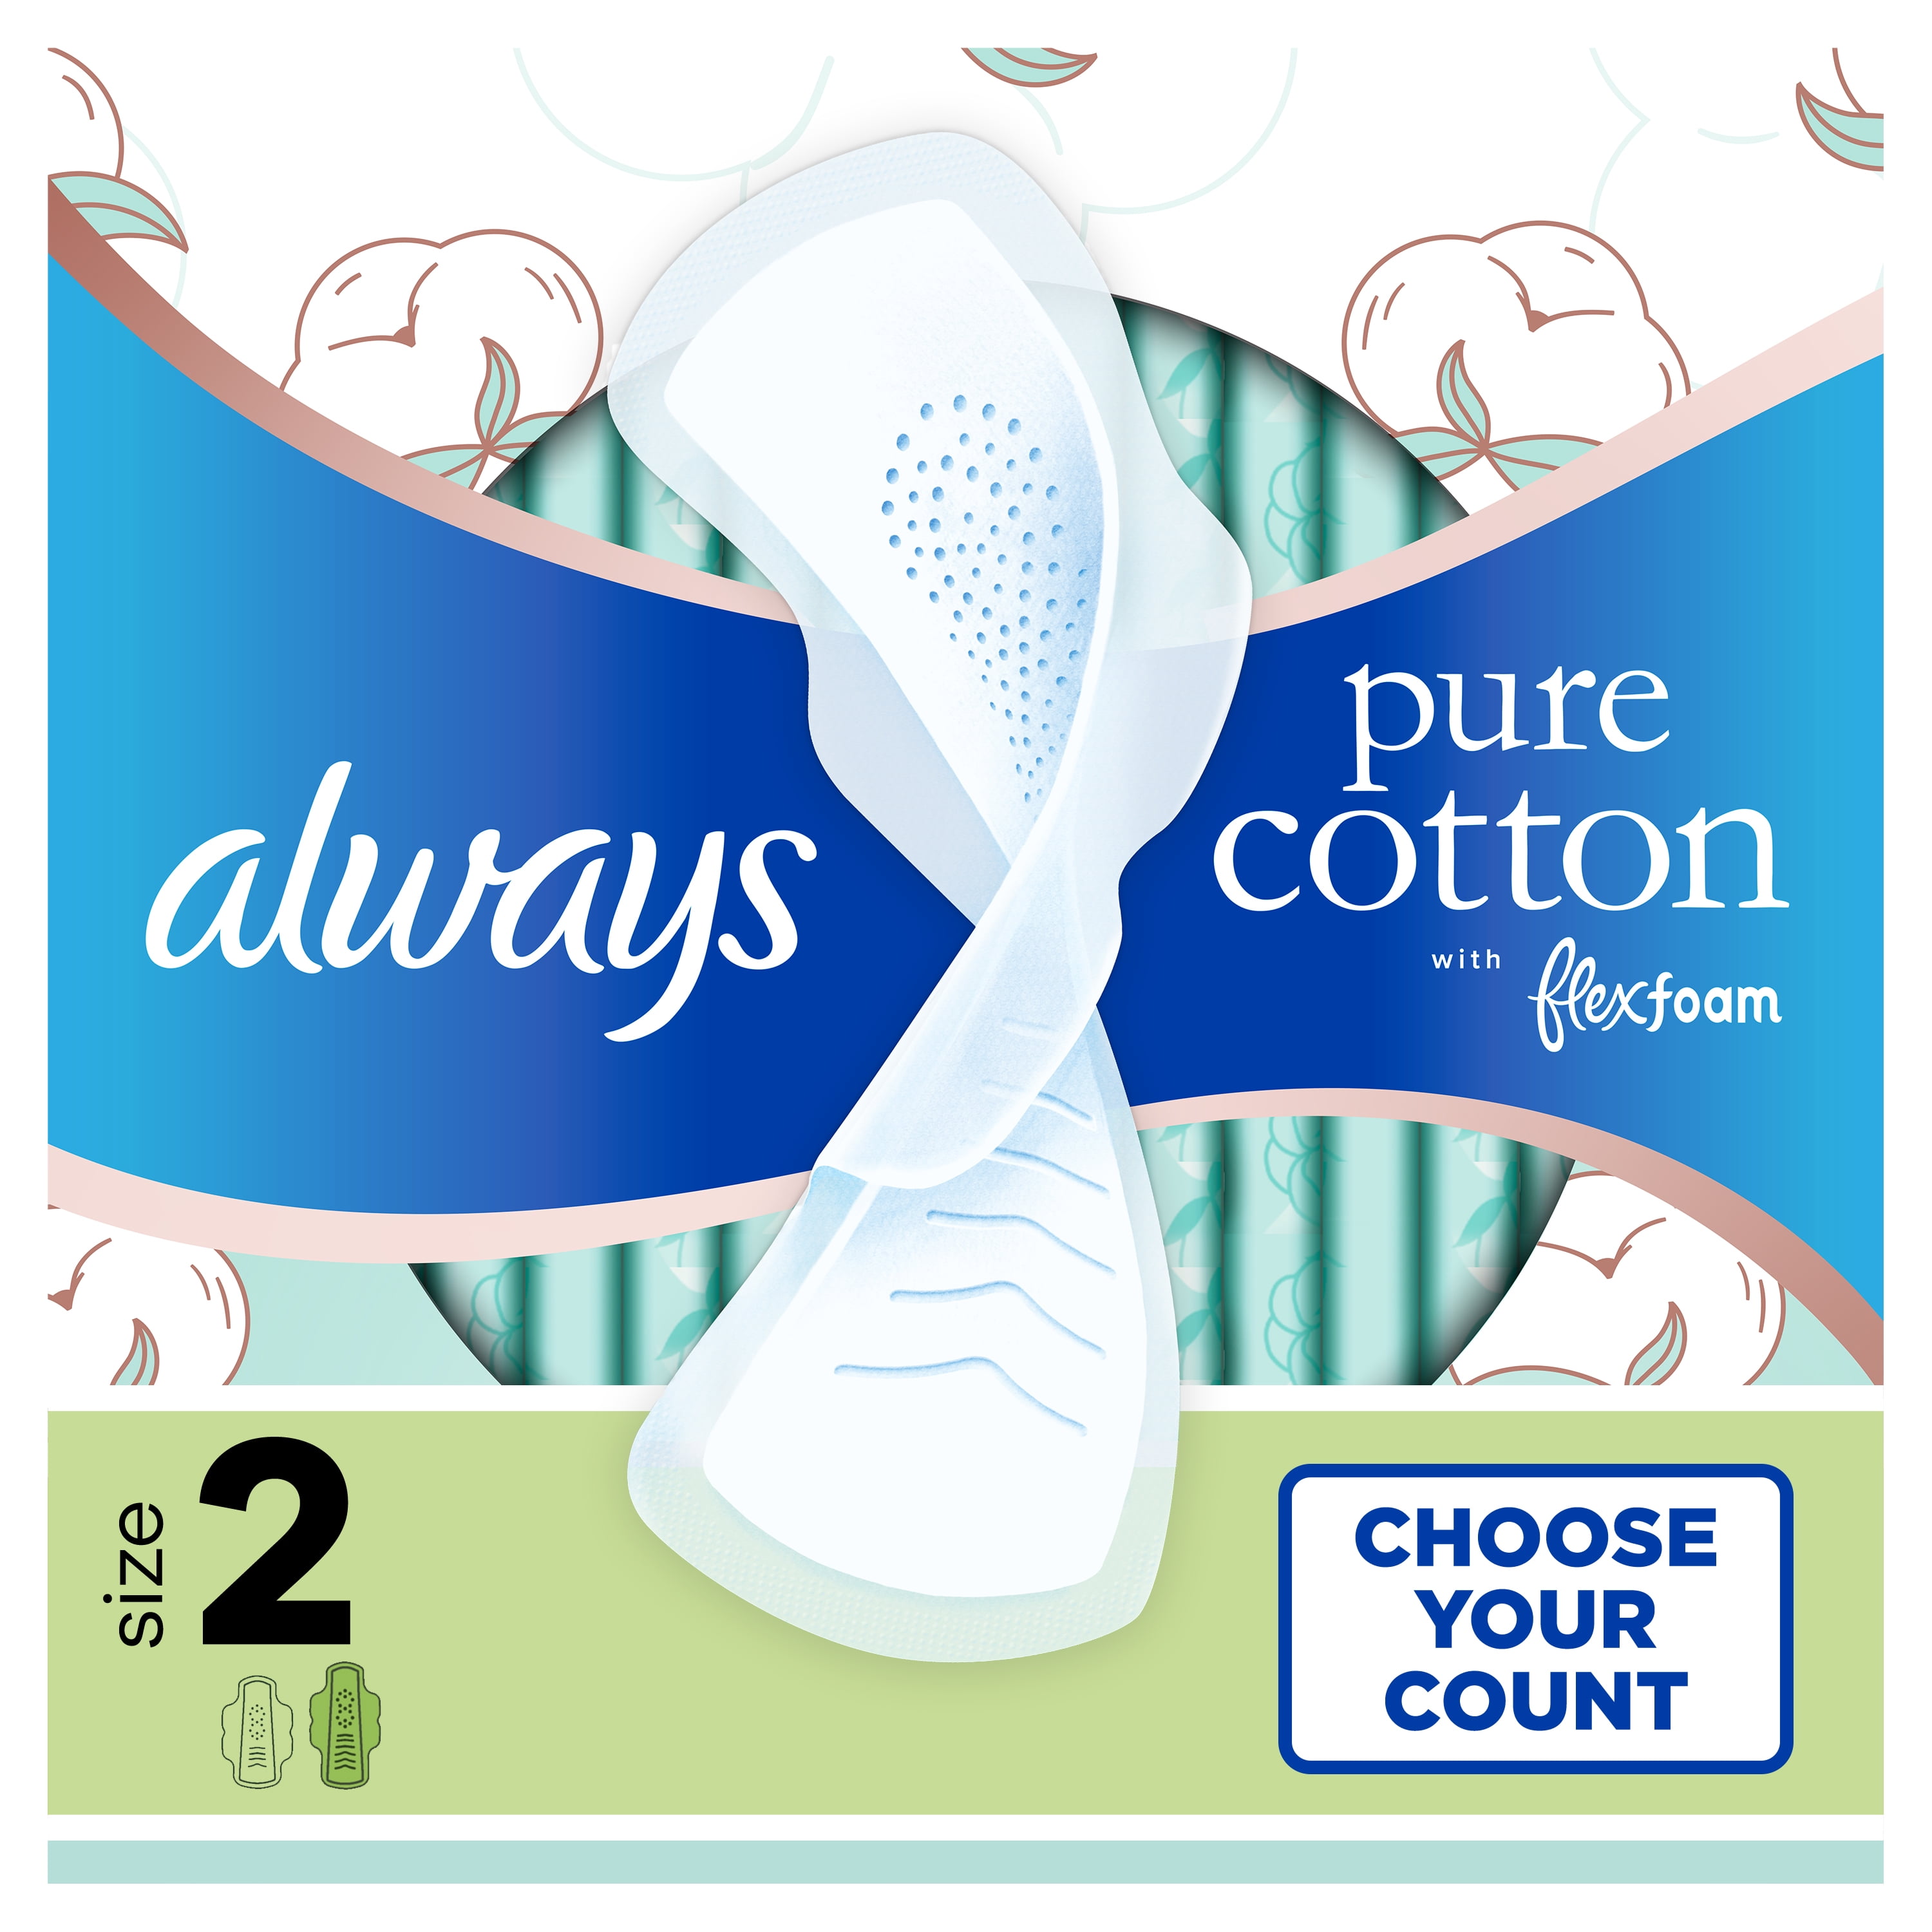 Always Organic Cotton Protection Ultra Normal Wings Sanitary